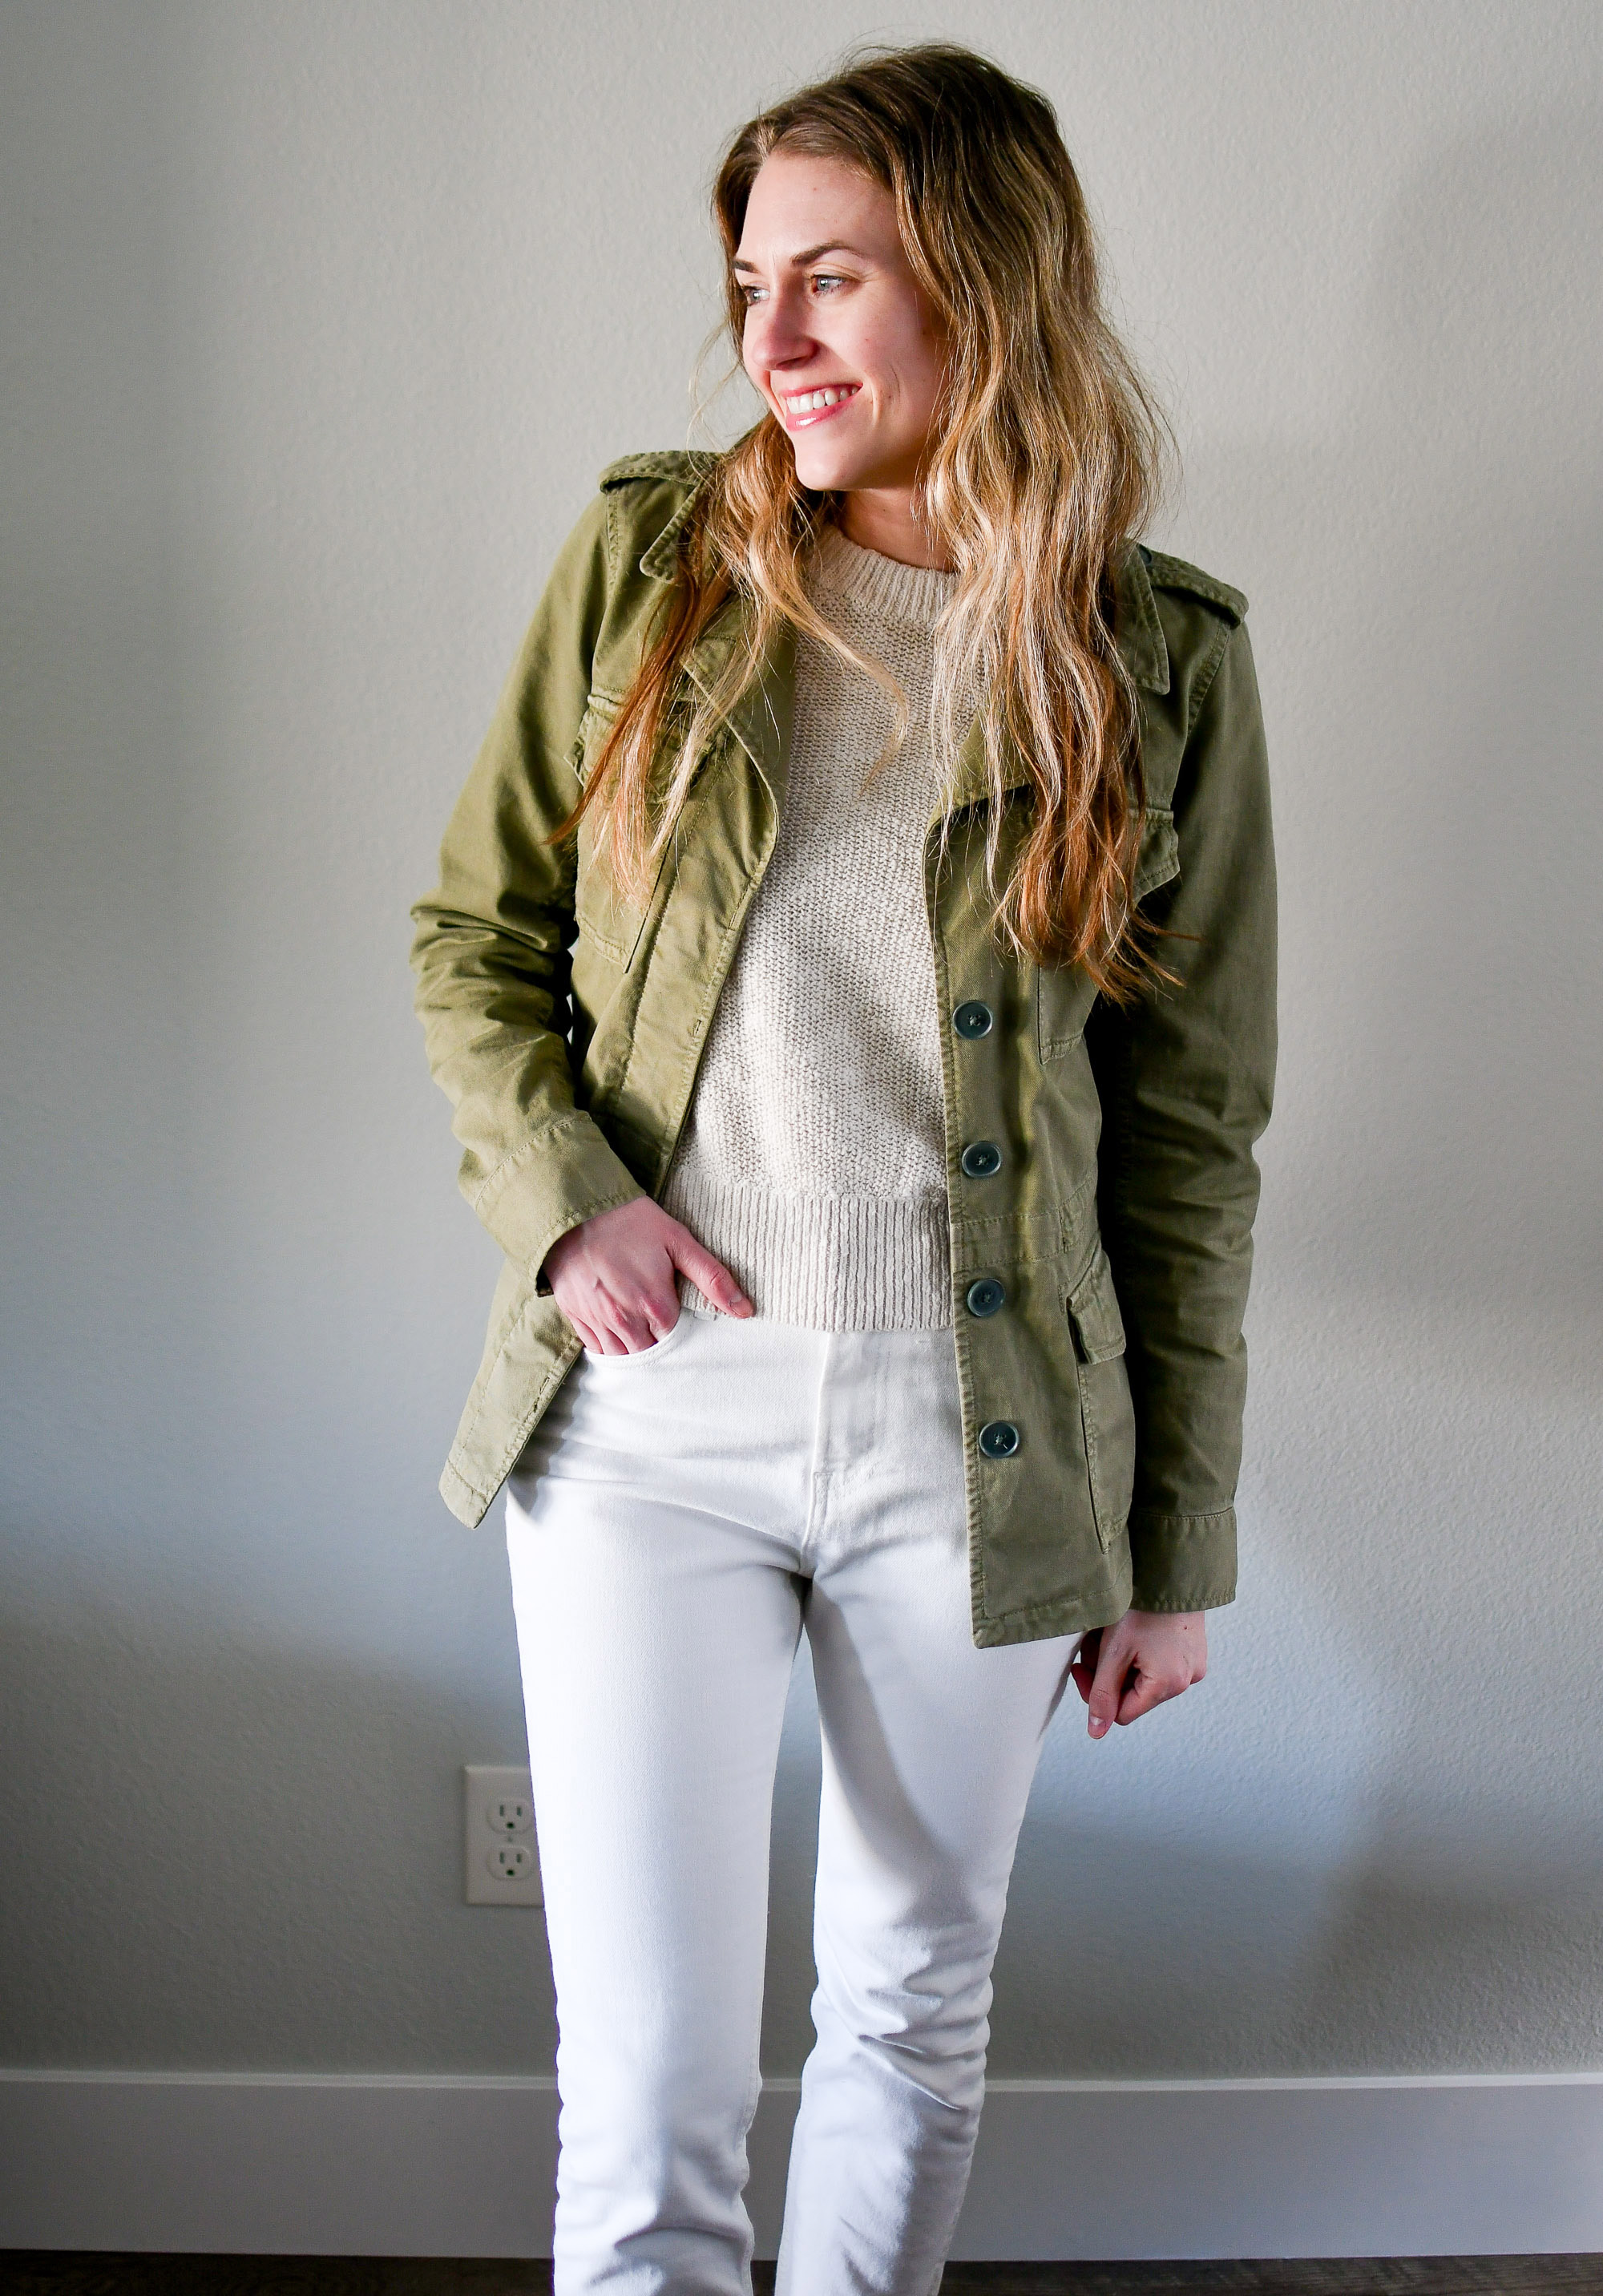 Green utility jacket spring outfit — Cotton Cashmere Cat Hair